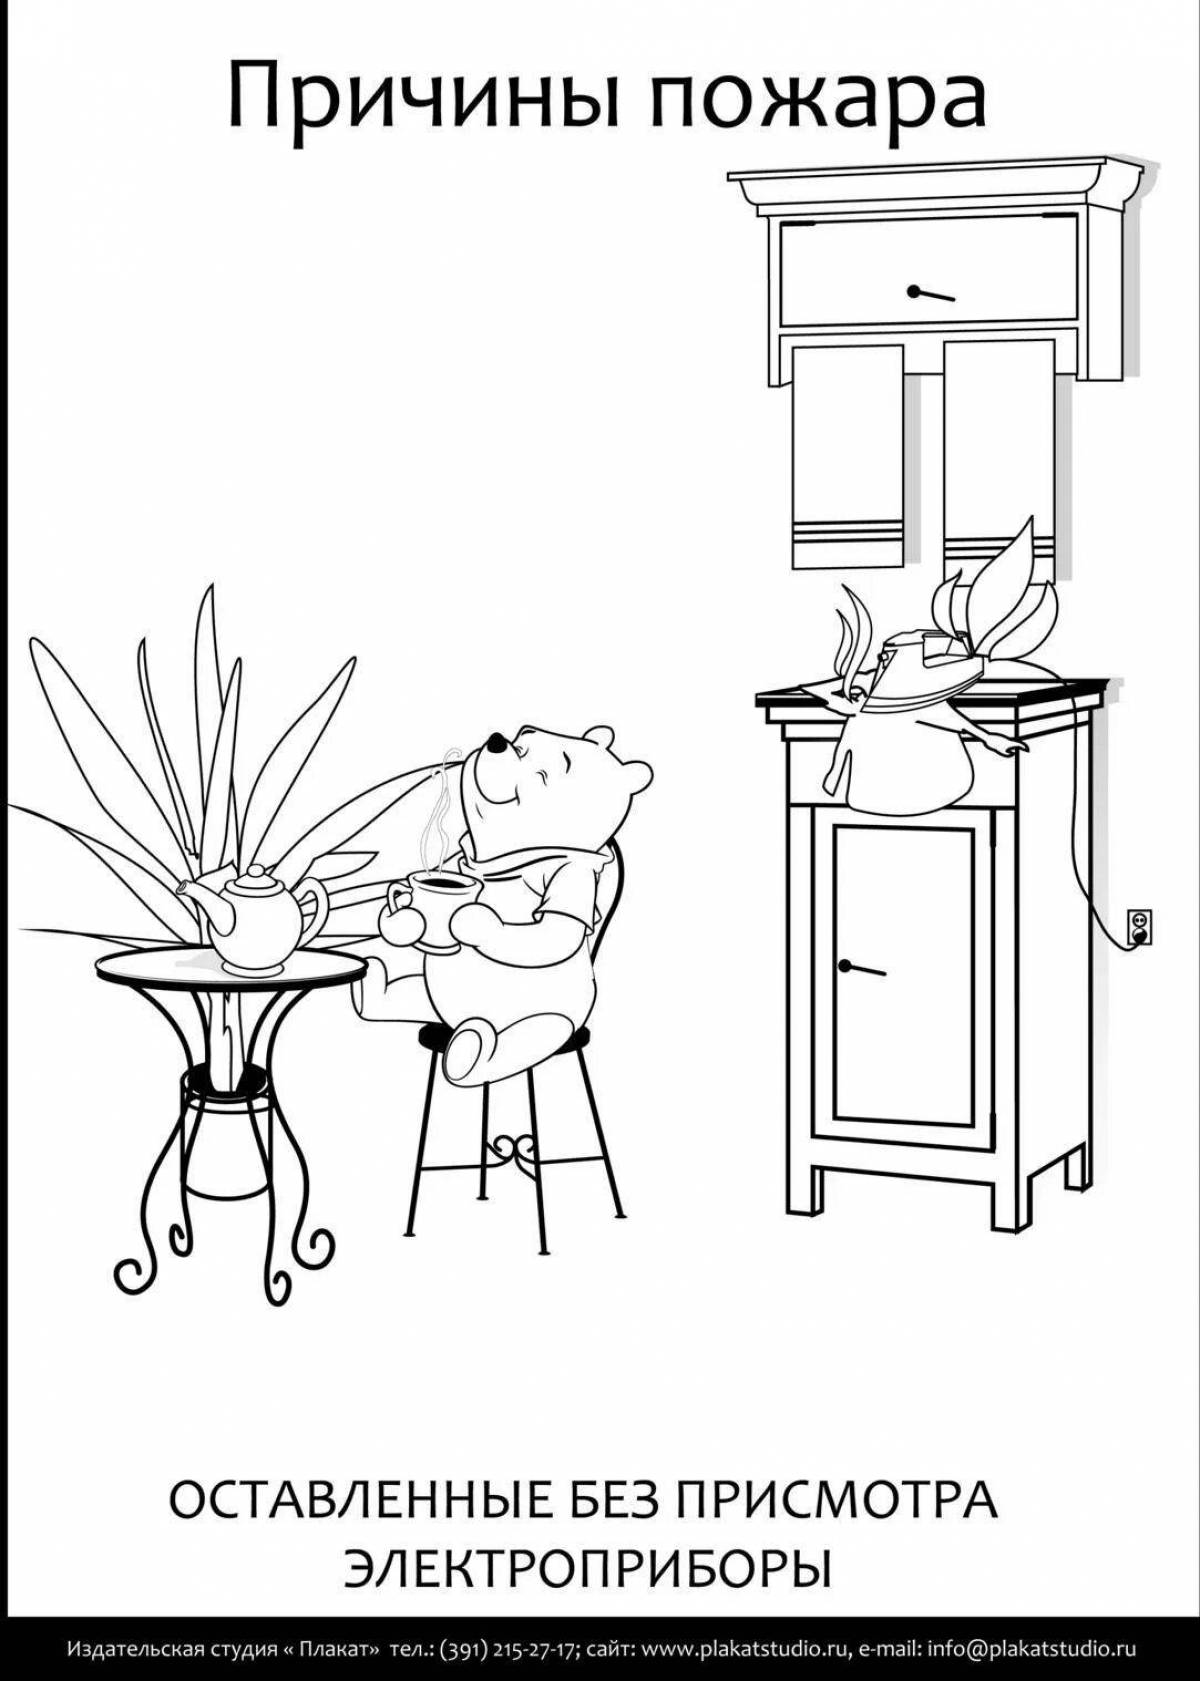 Attractive safety rules coloring pages